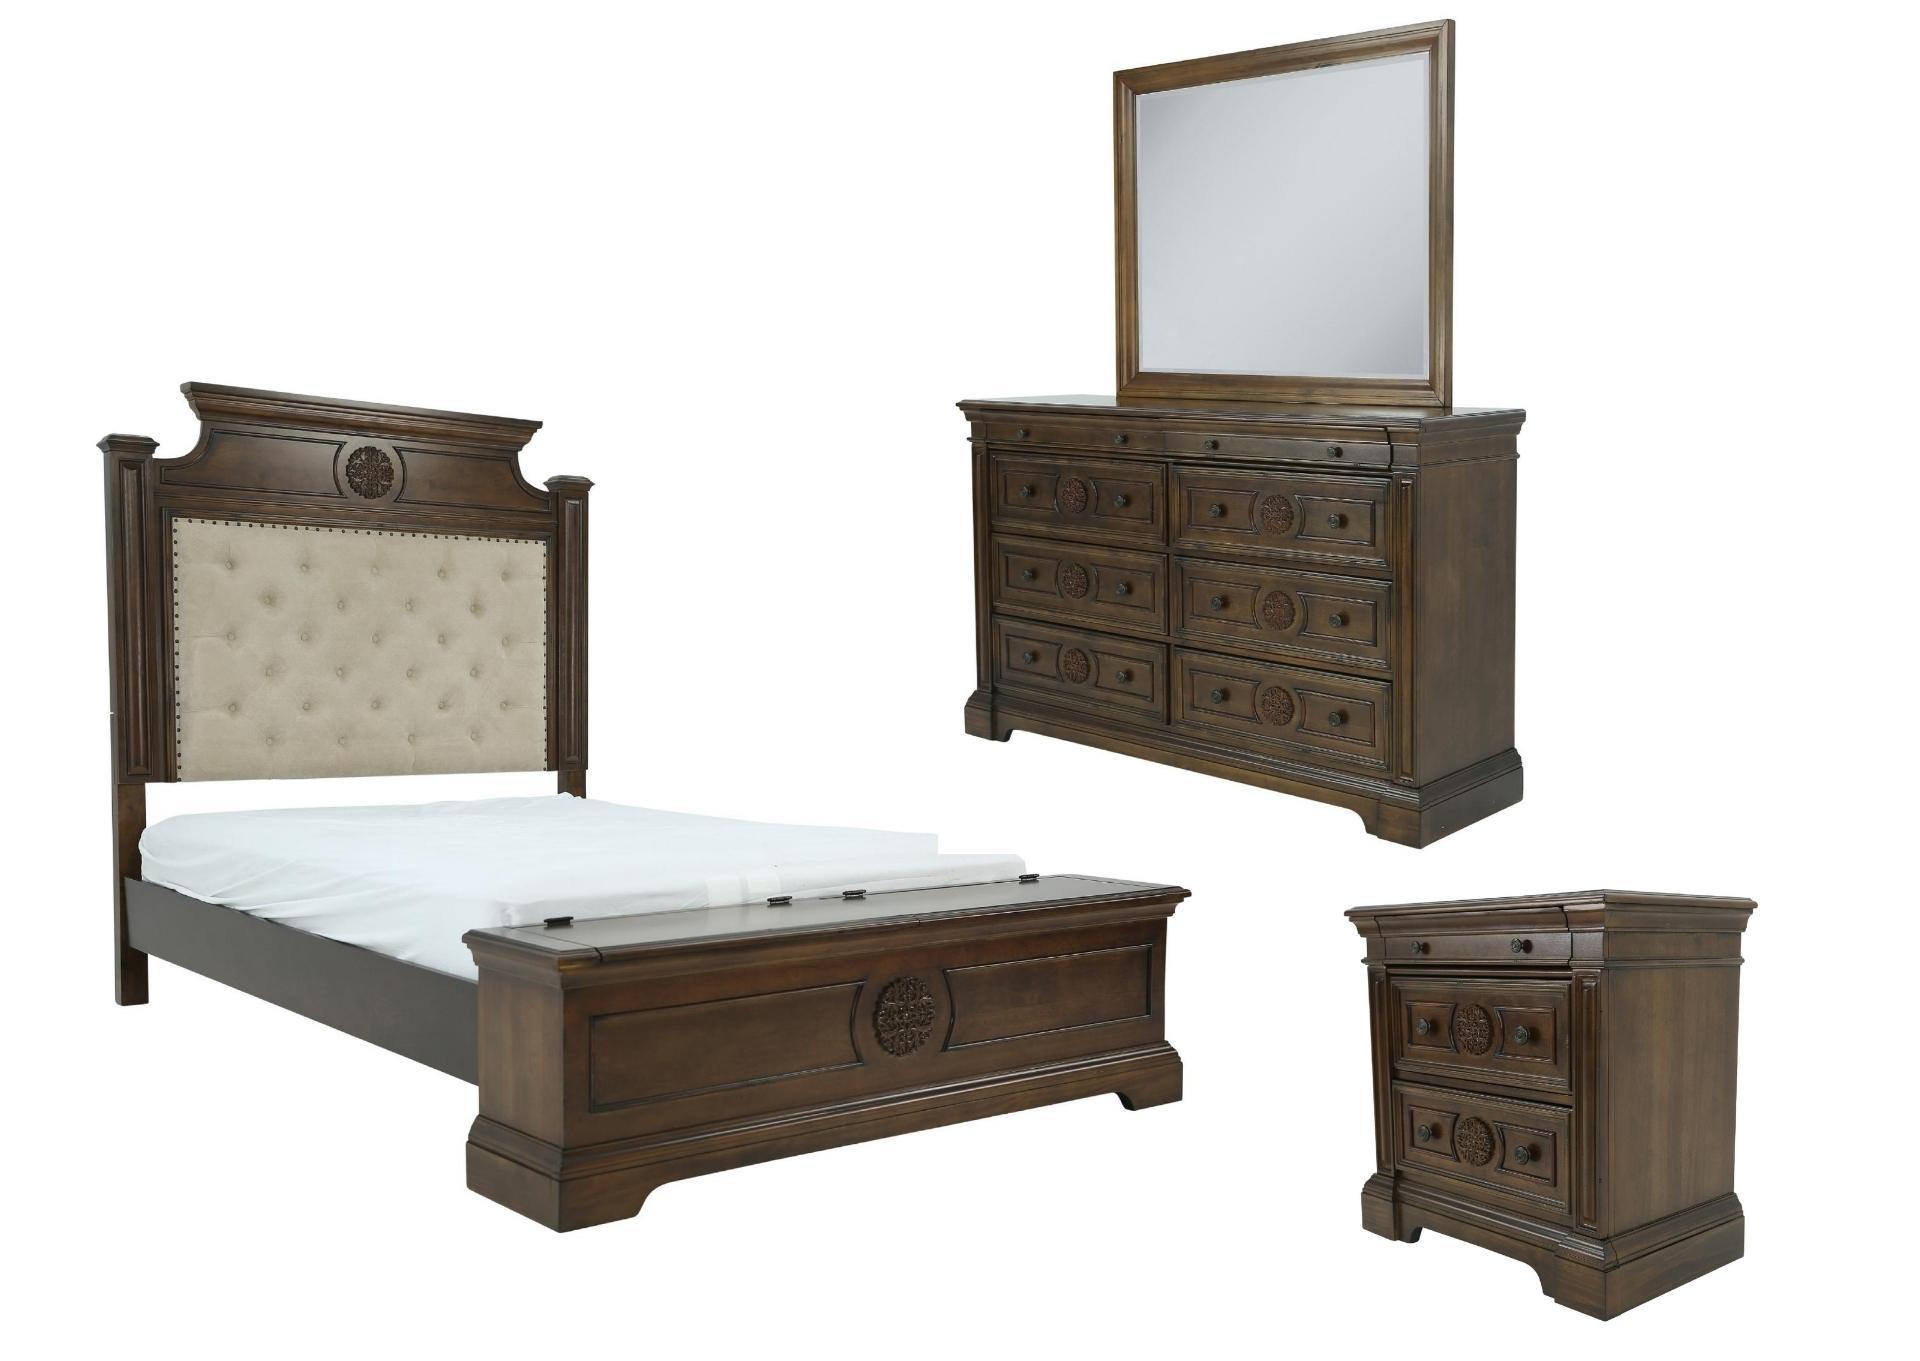 AMBER UPHOLSTERED QUEEN STORAGE BEDROOM,LIFESTYLE FURNITURE